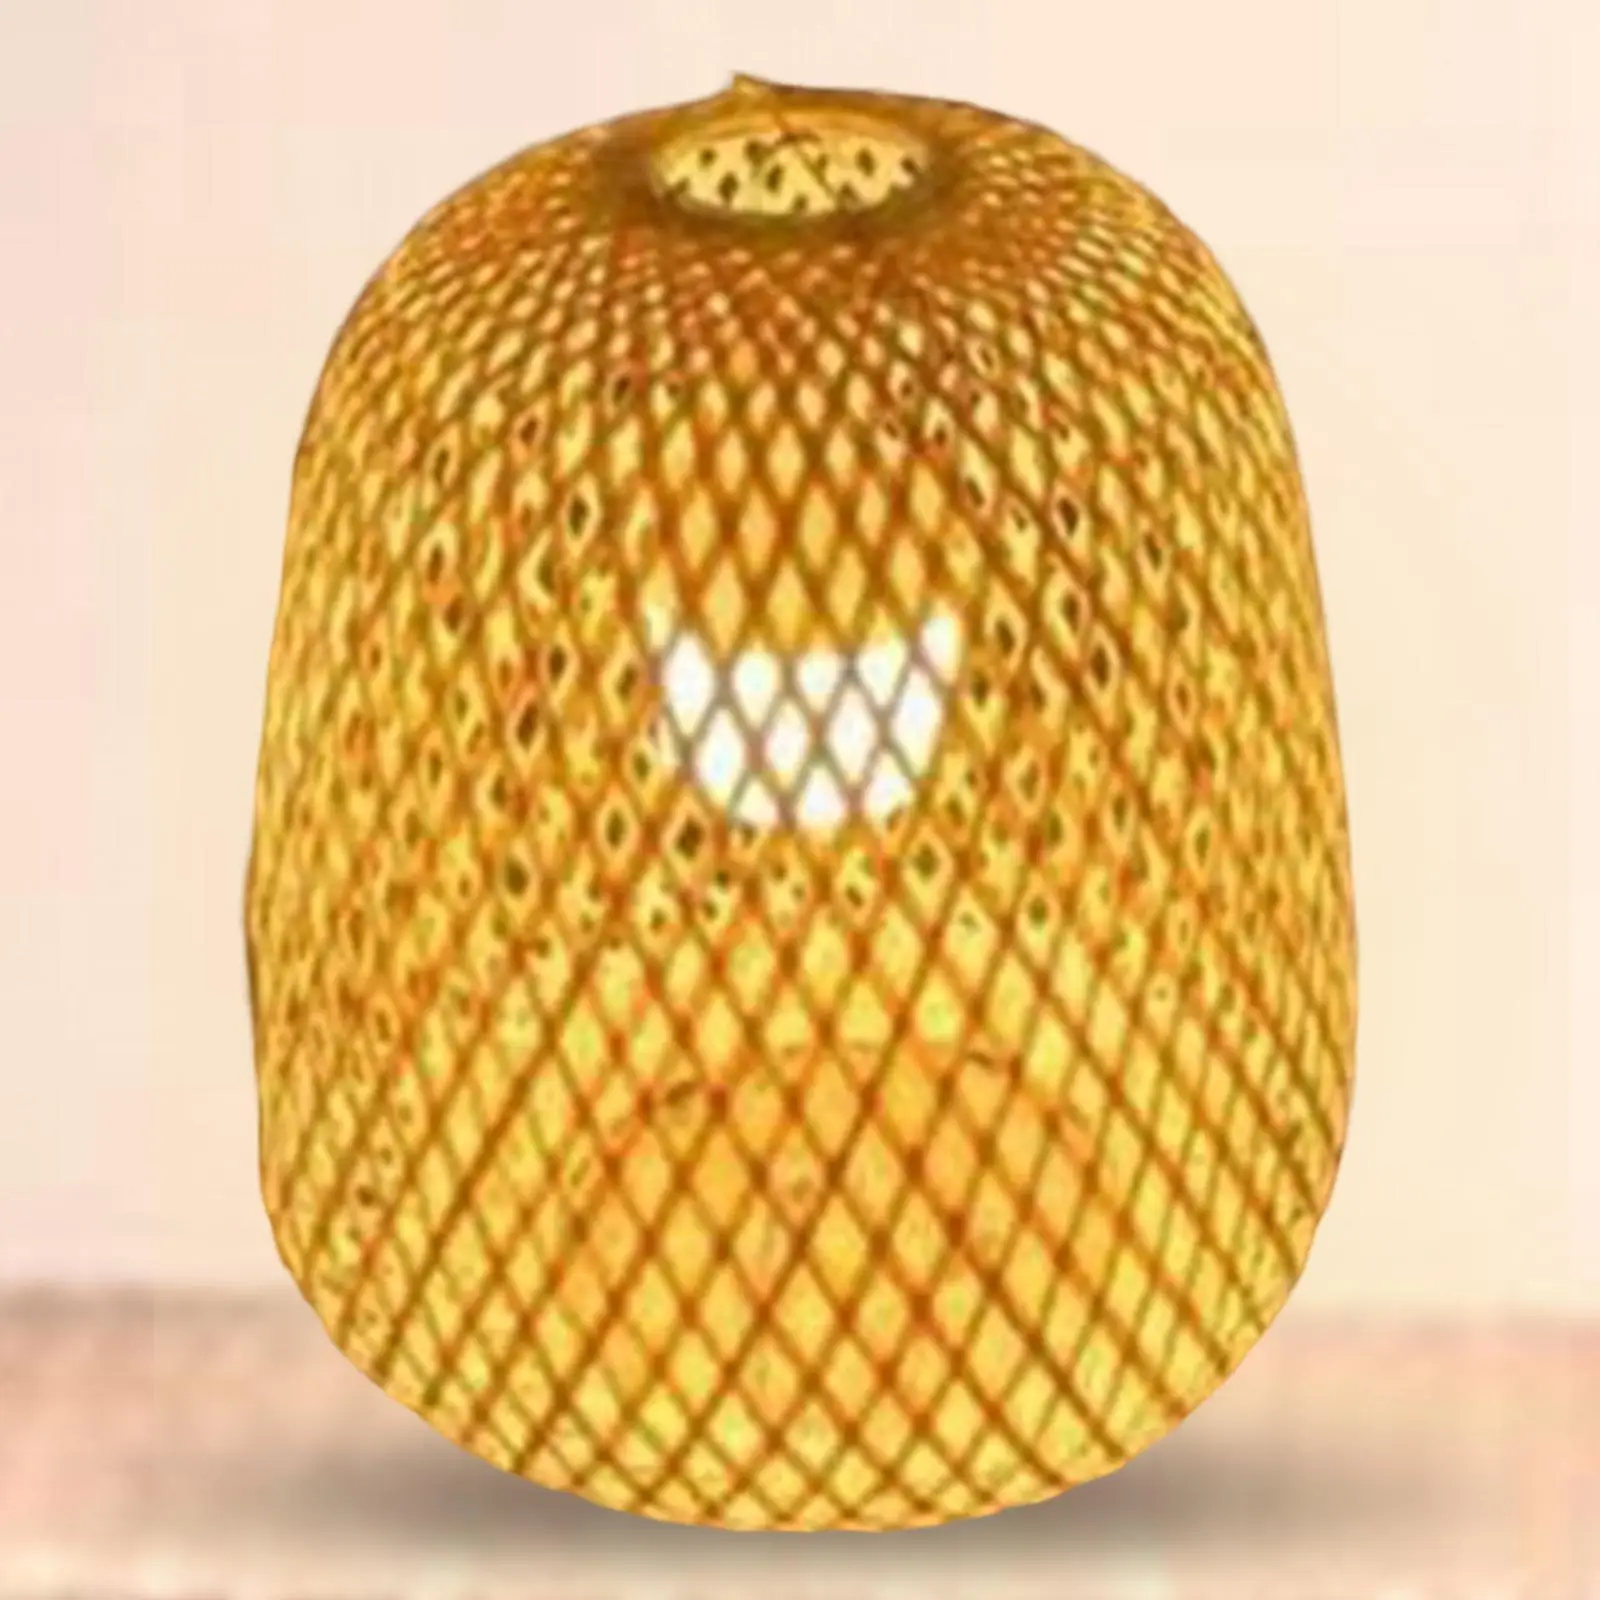 Woven Bamboo Lamp Shade Droplight Ceiling Light Cover Lampshade for Kitchen